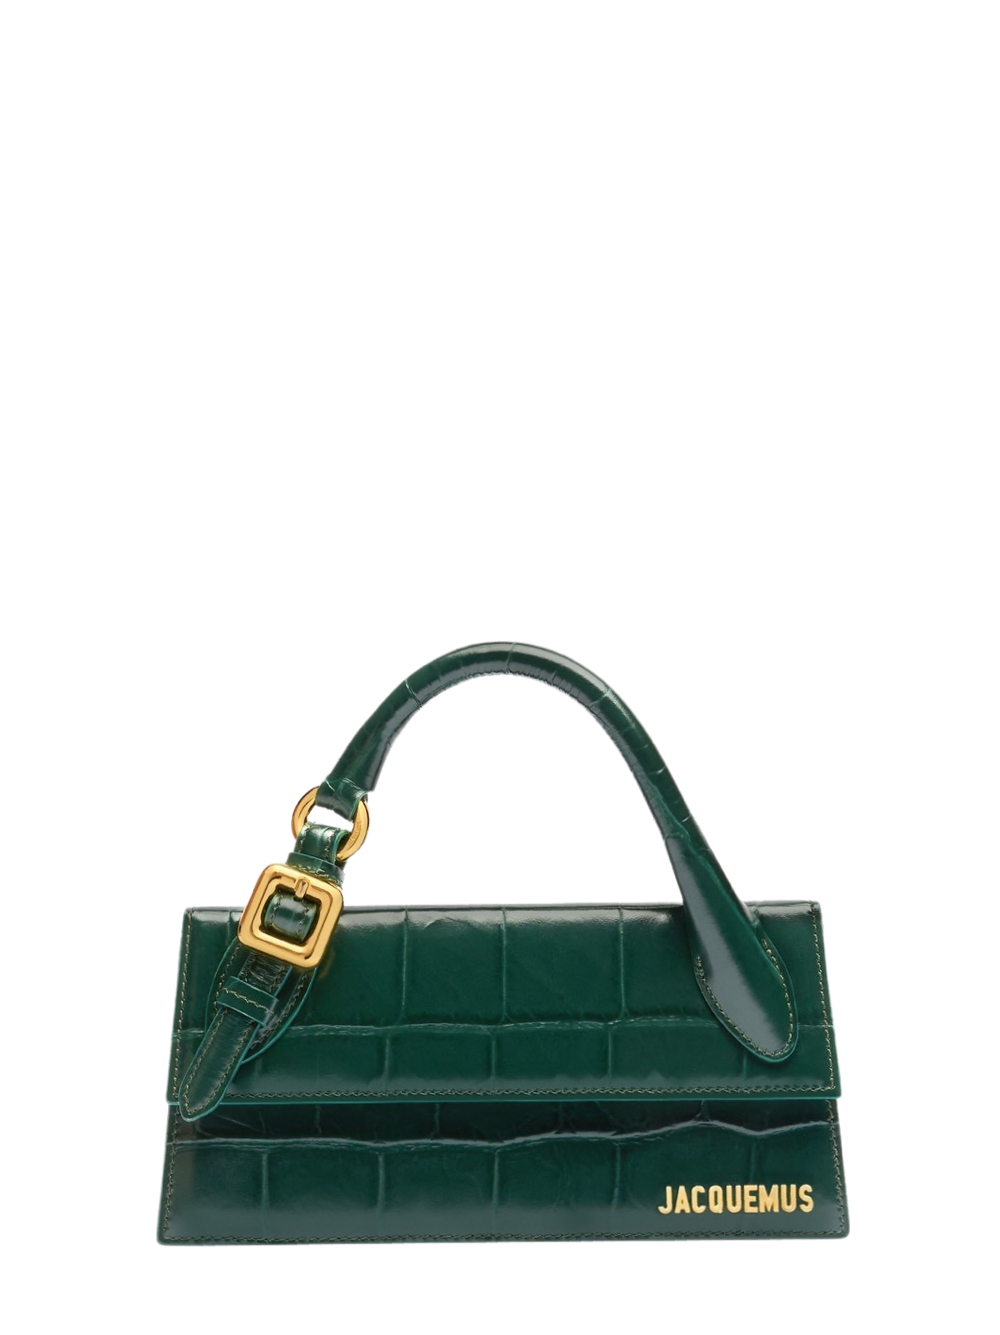 Jacquemus Le Chiquito Long Boucle in Dark Green